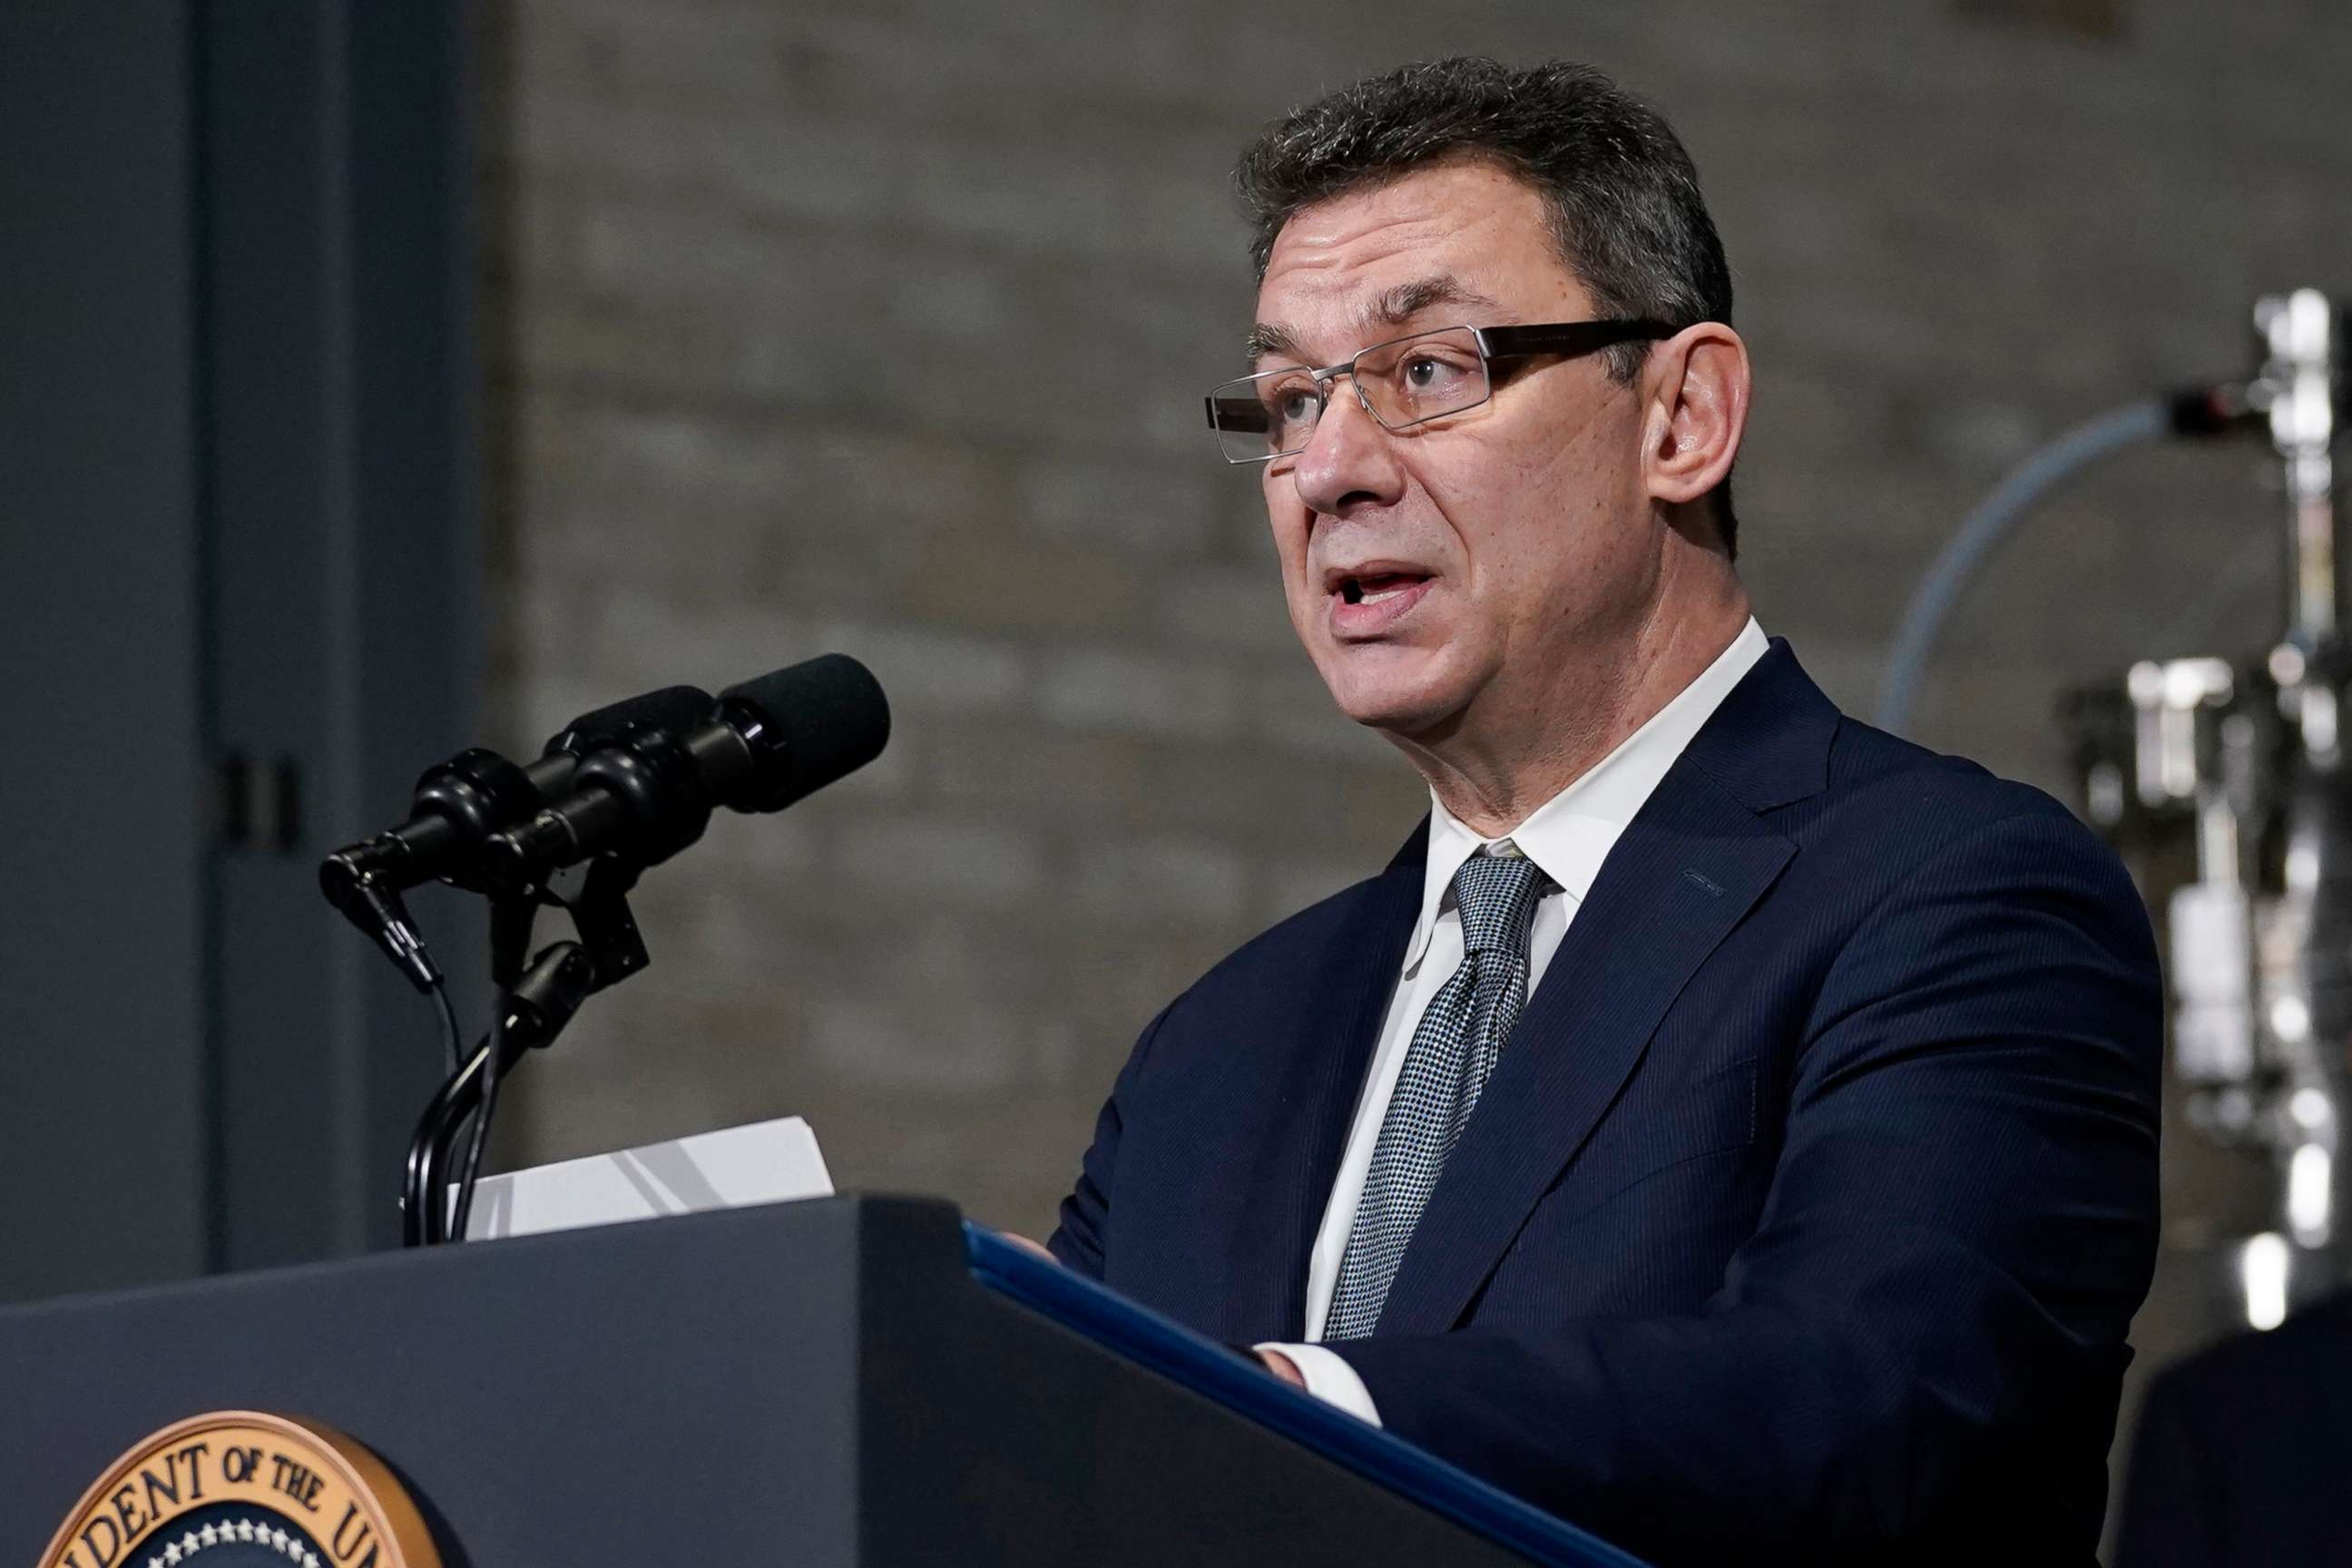 PHOTO: CEO Albert Bourla speaks at a Pfizer manufacturing site, in Portage, Mich., Feb. 19, 2021.